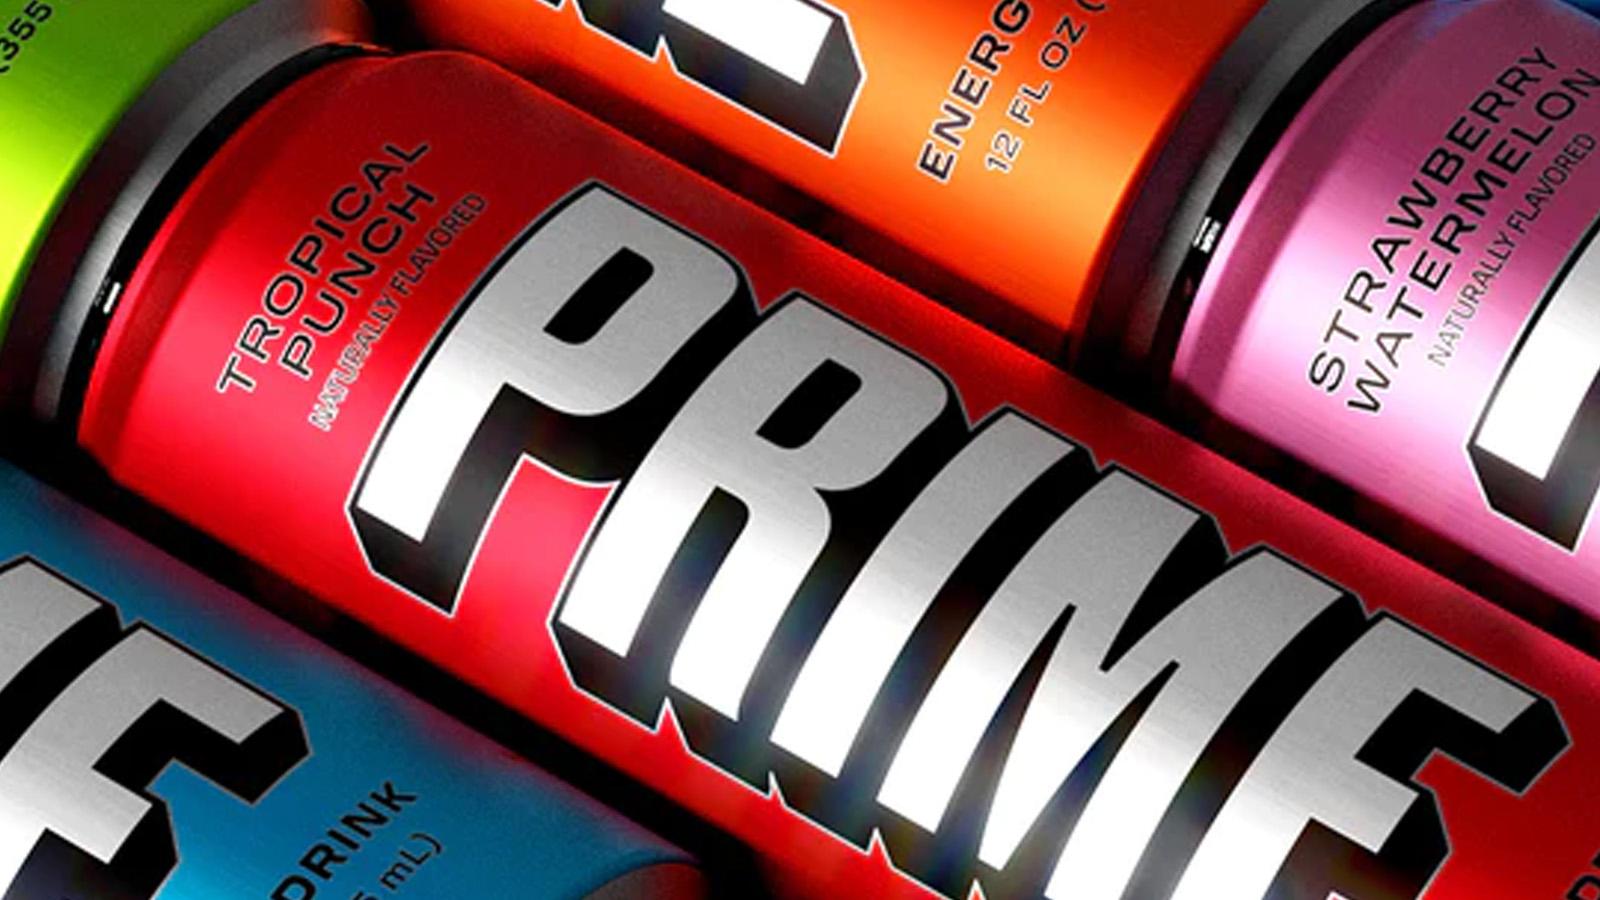 Prime Energy cans